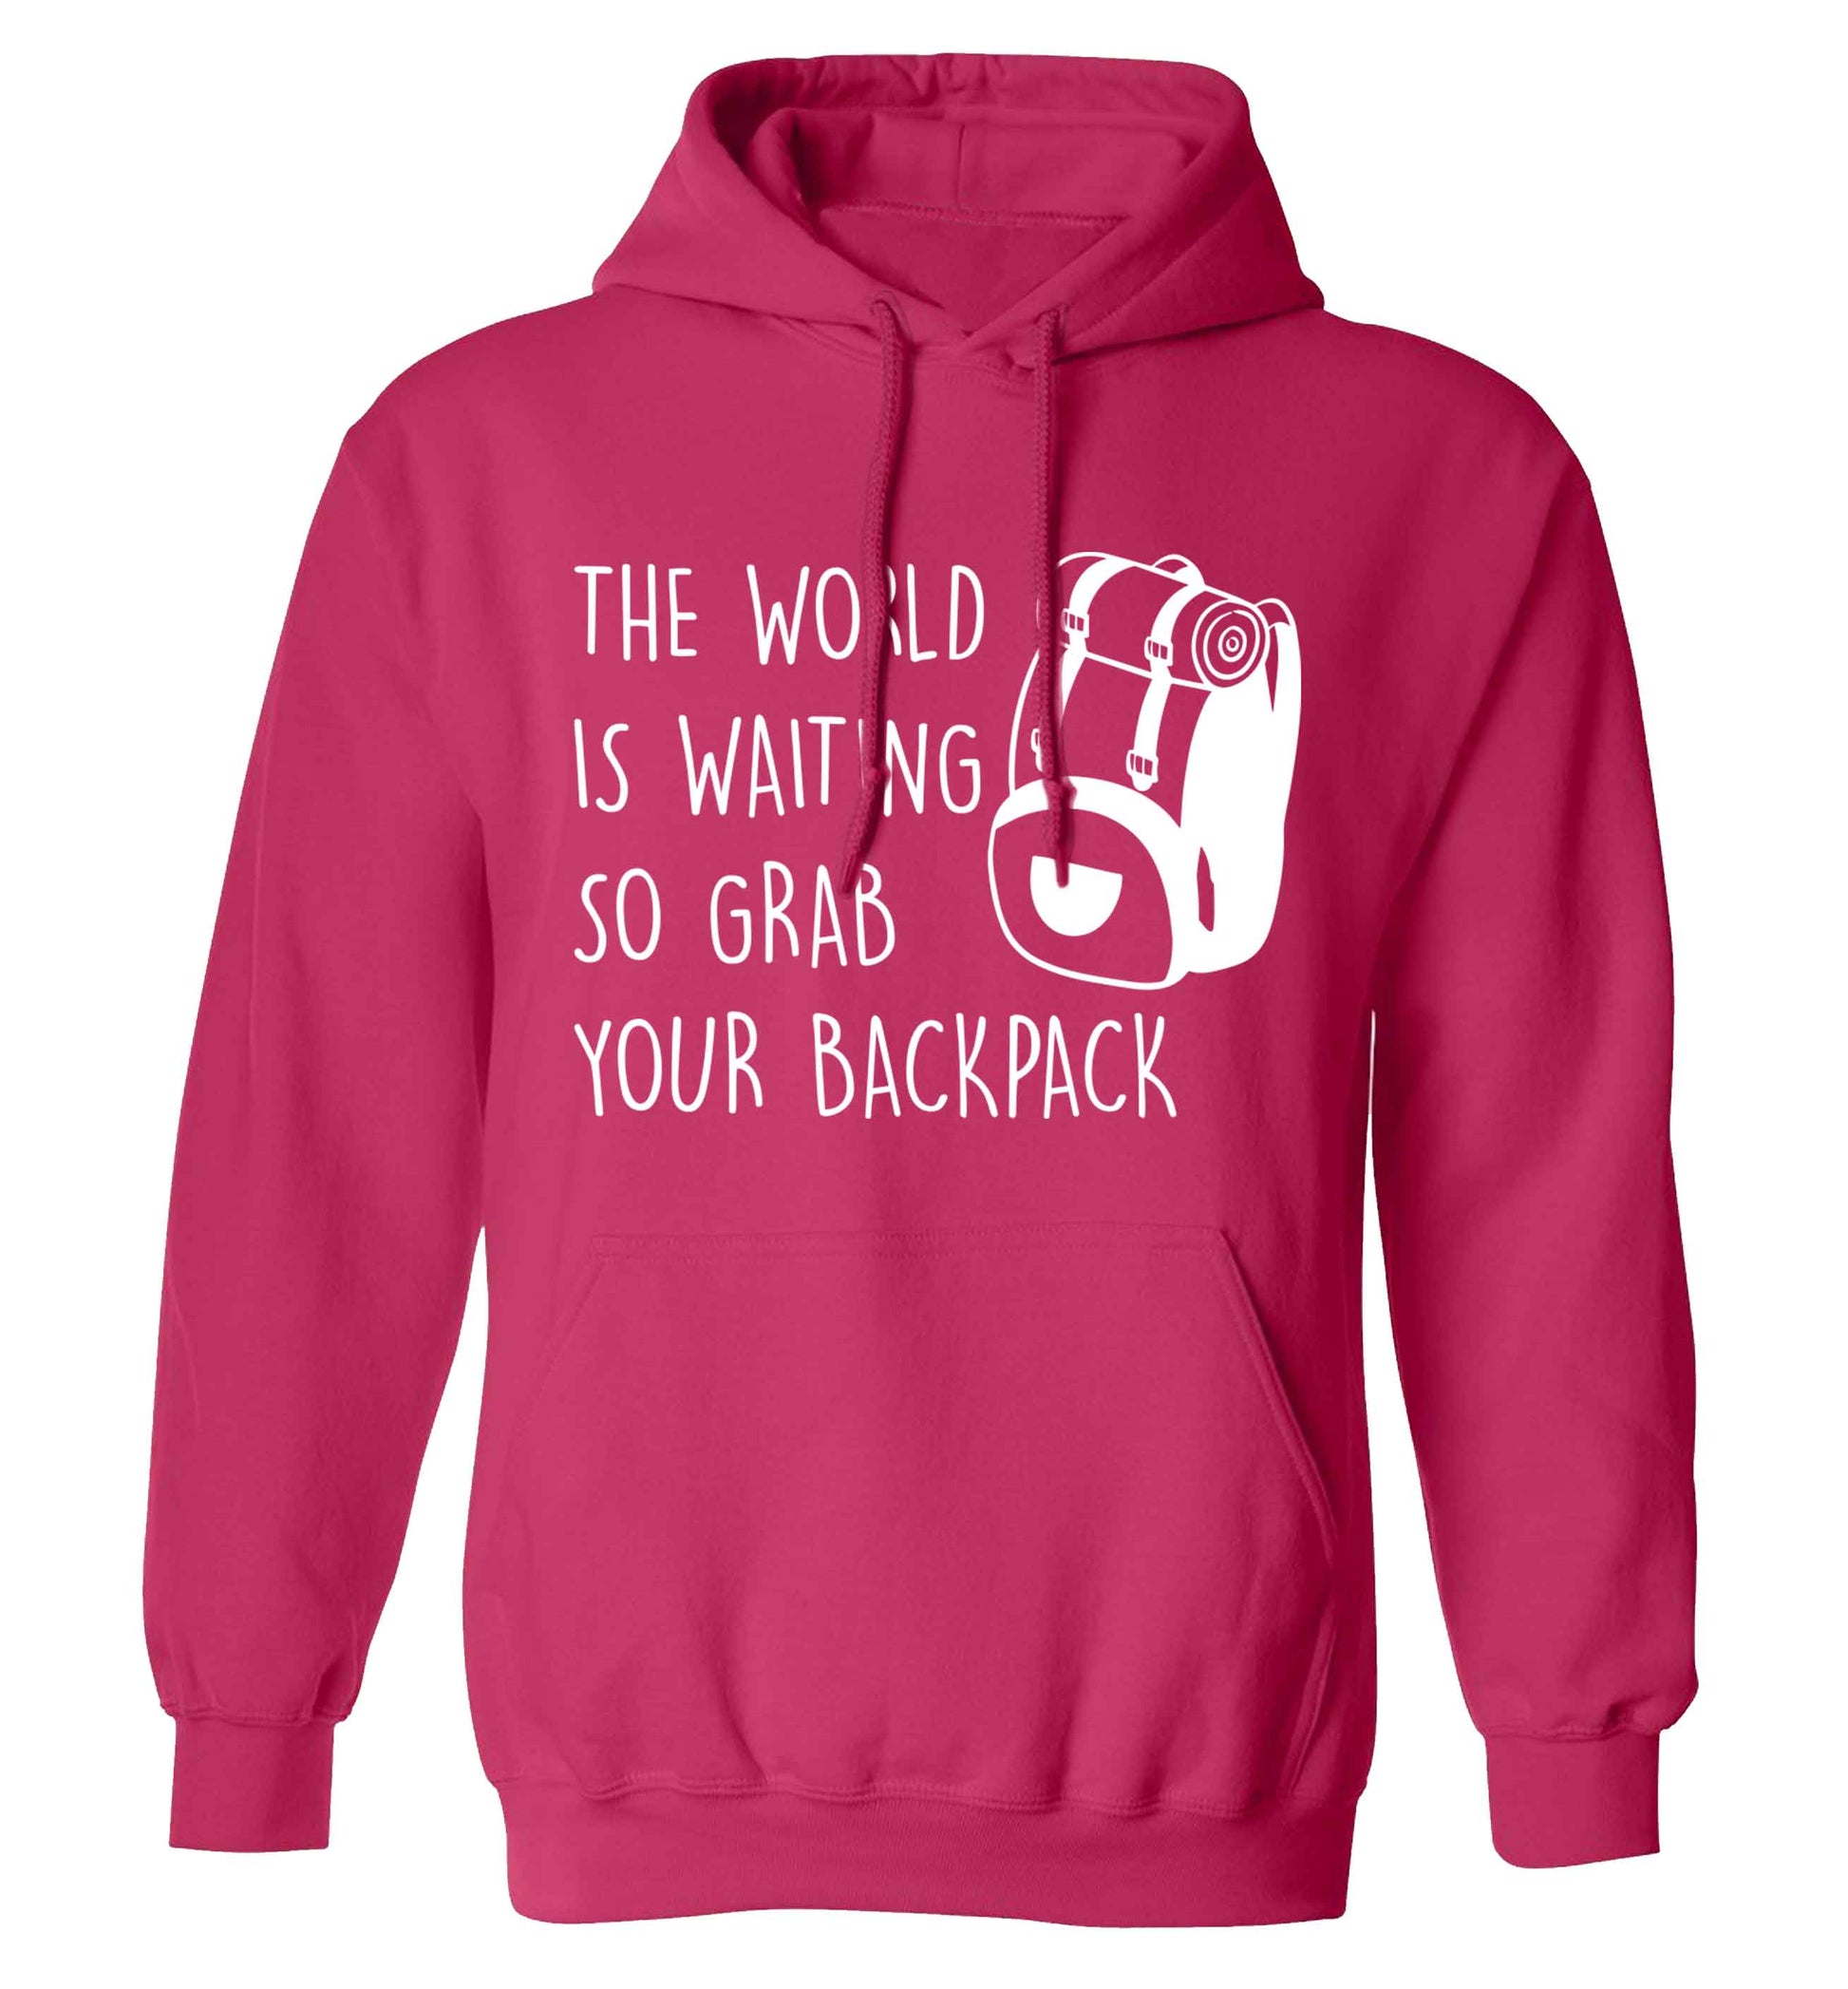 The world is waiting so grab your backpack adults unisex pink hoodie 2XL